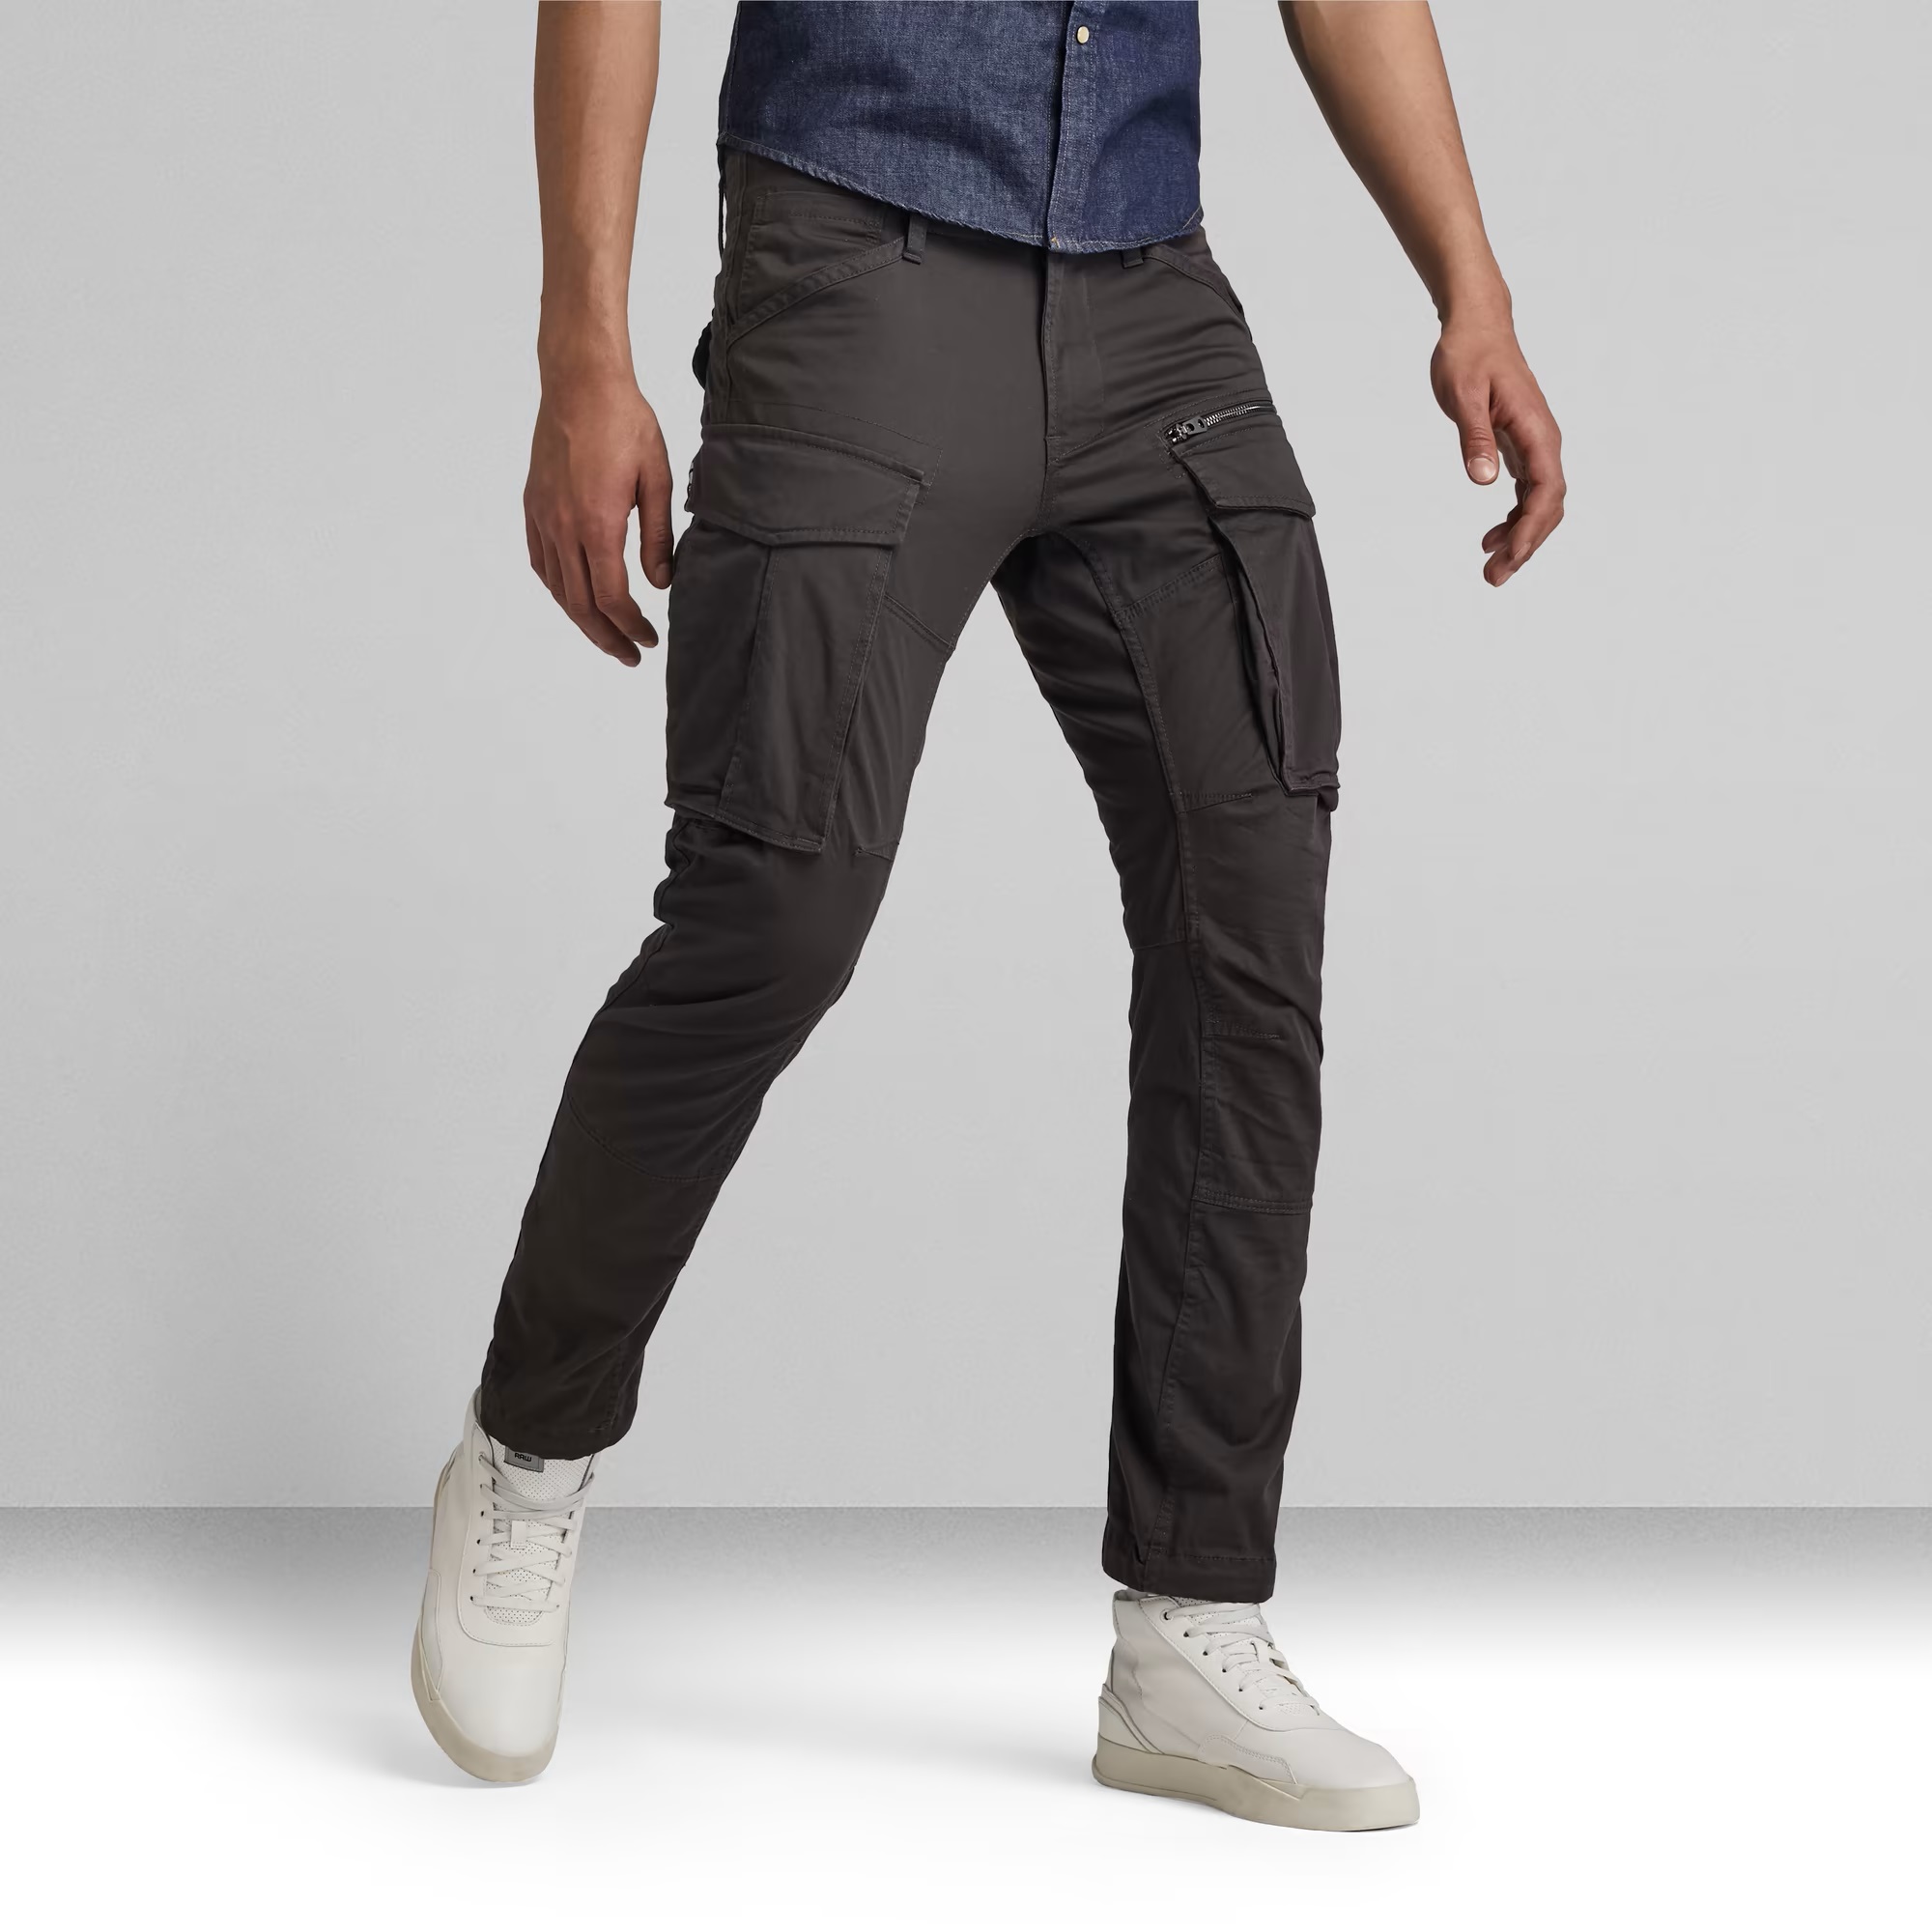 G-STAR RAW ROVIC ZIP TAPERED CARGO - G-10 Exclusive Wear